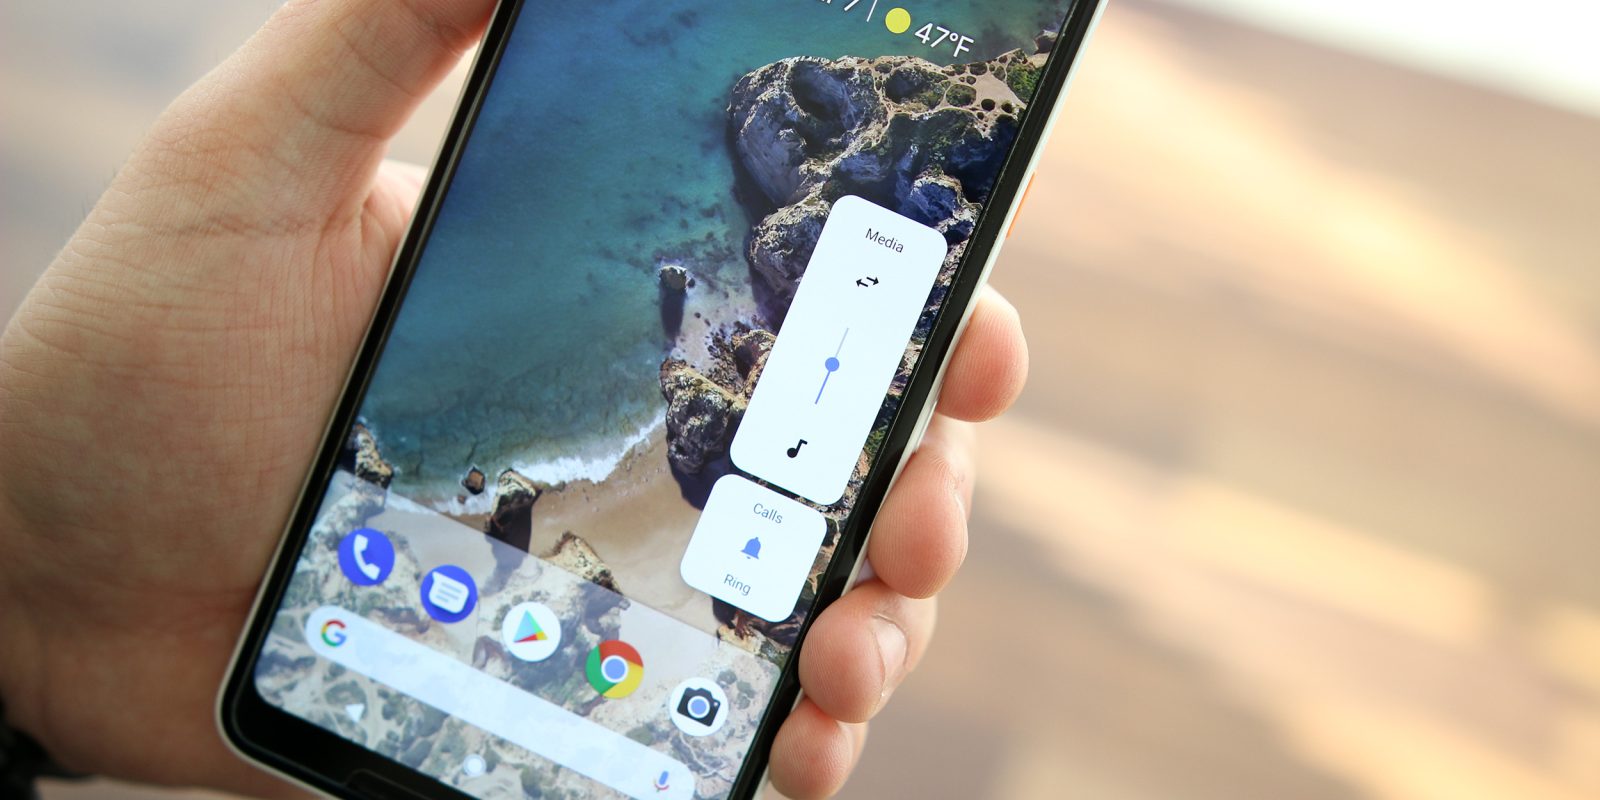 New Features of Android P